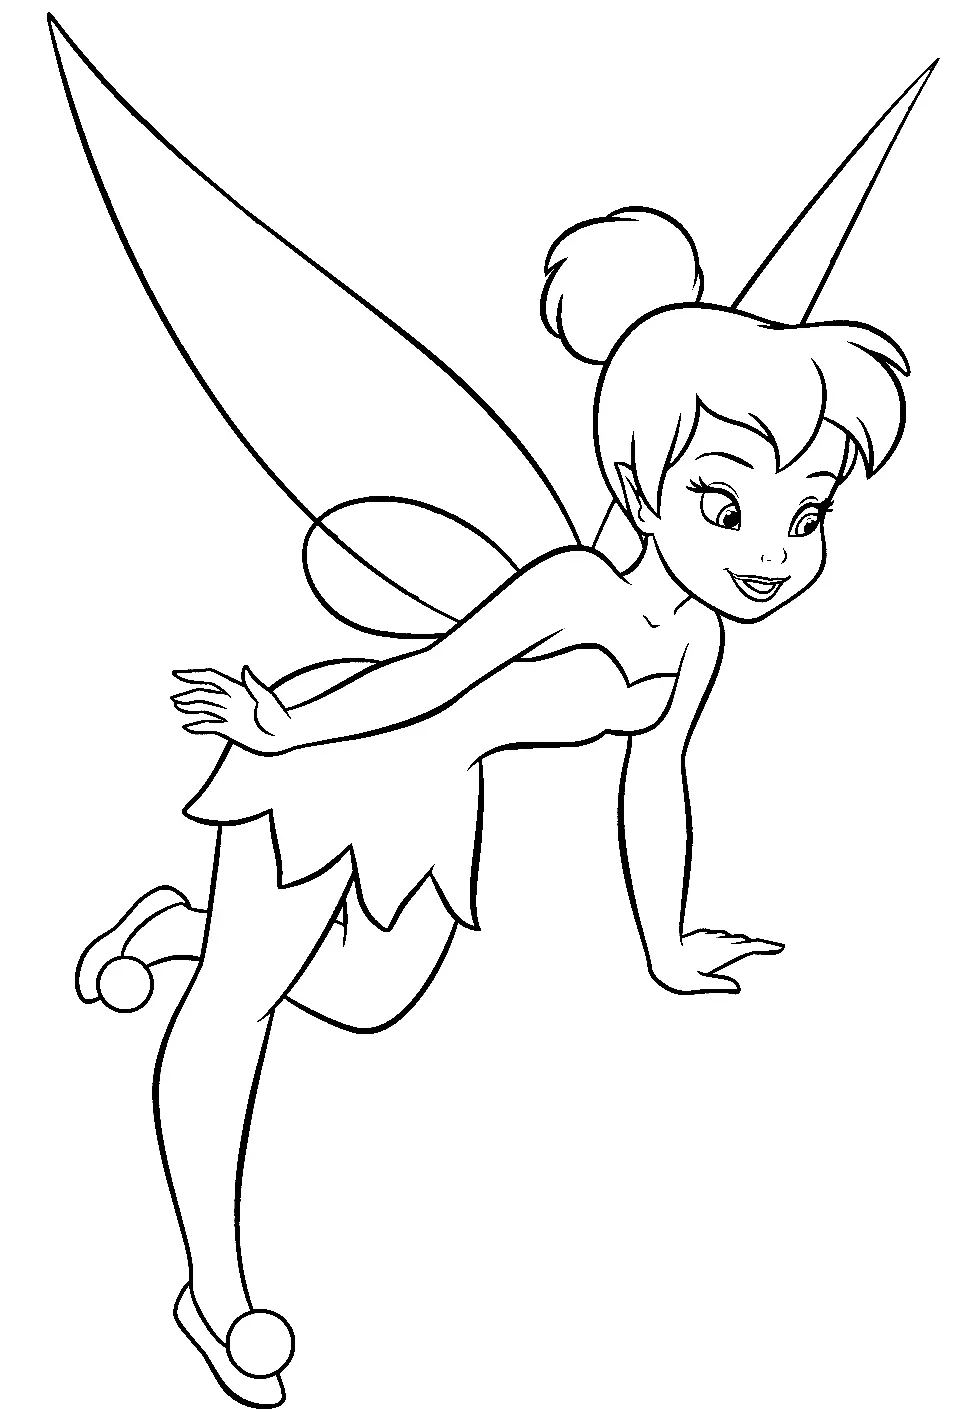 Cute Tinker Bell Coloring Page